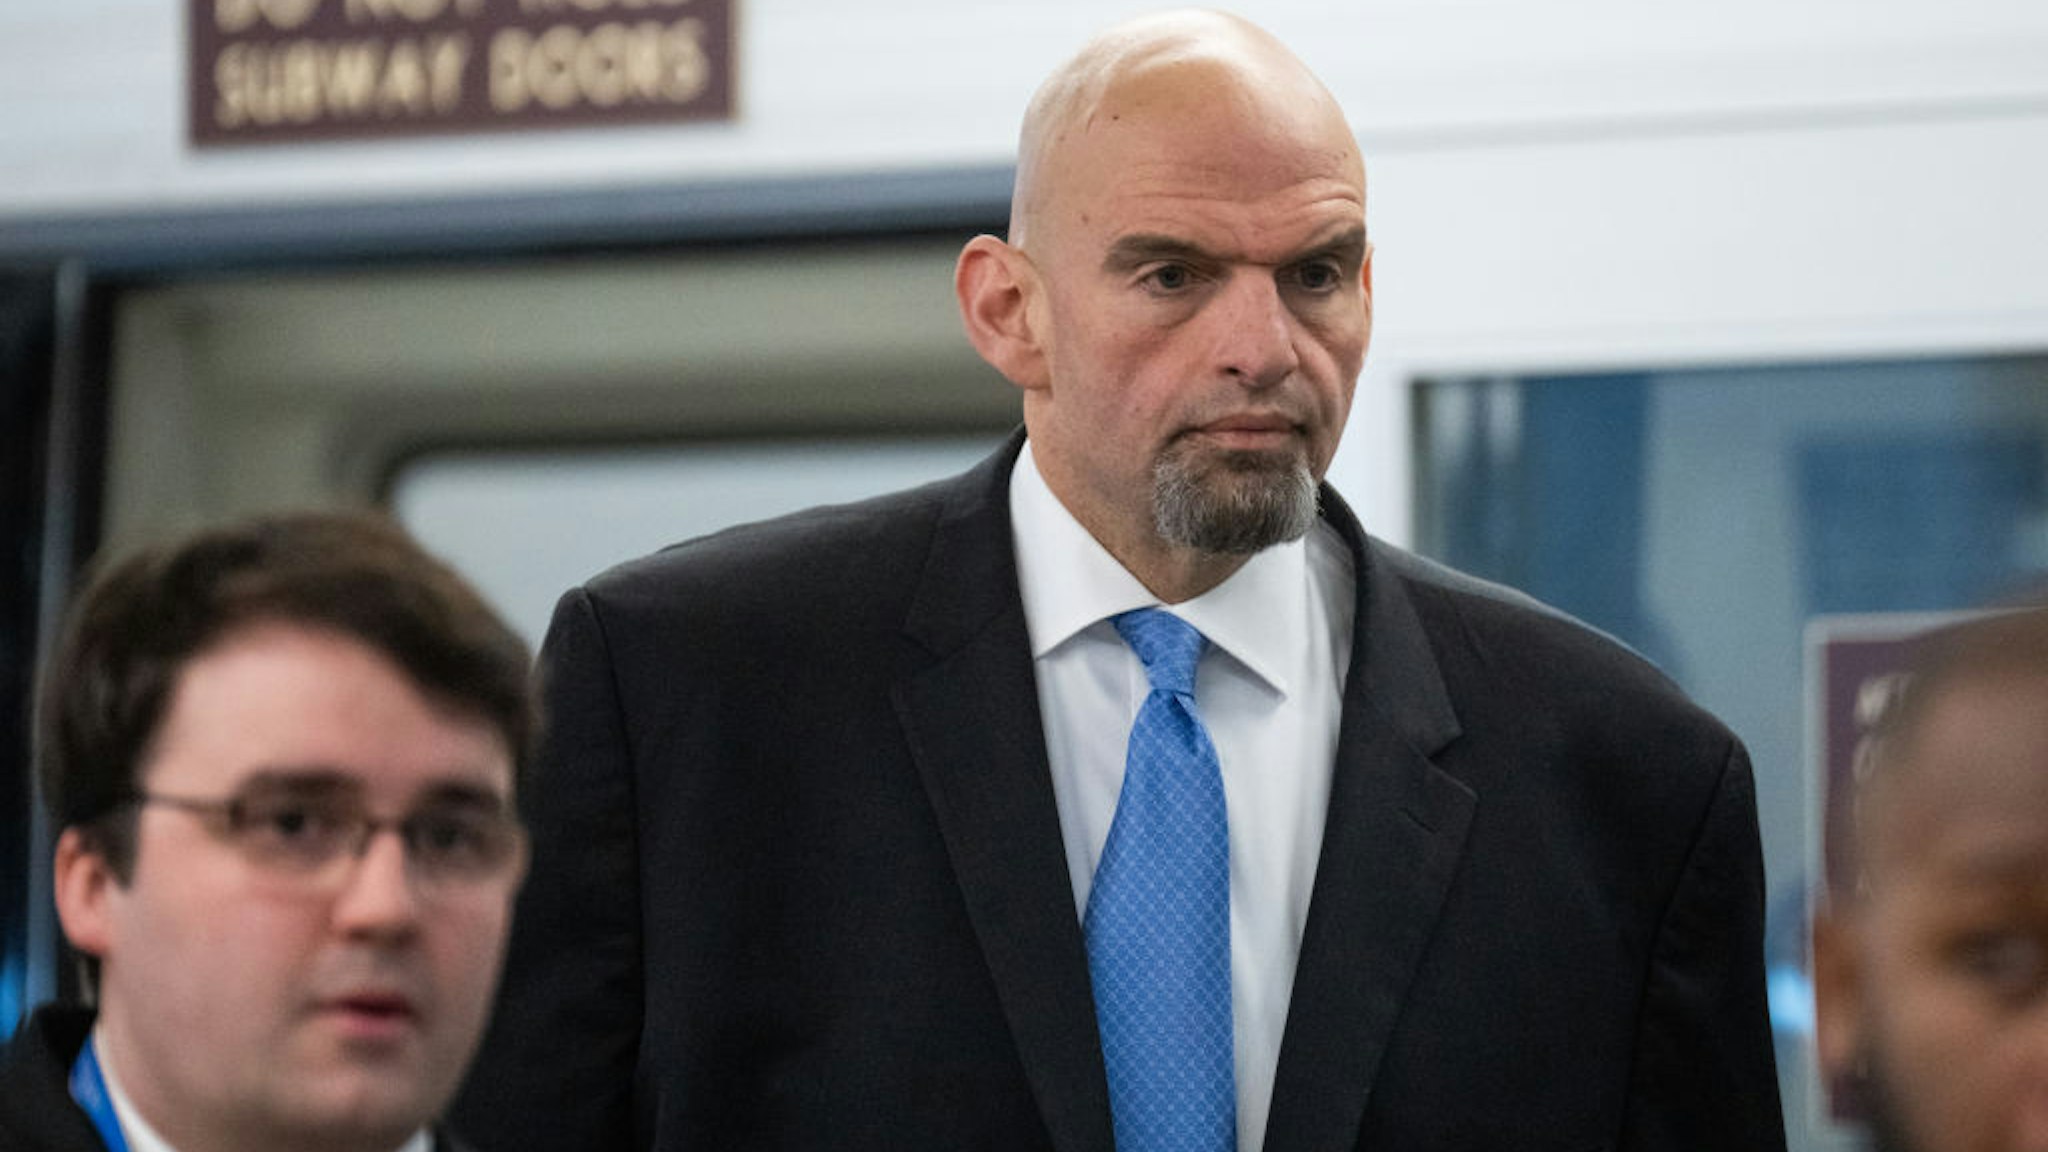 UNITED STATES - FEBRUARY 14: Sen. John Fetterman, D-Pa., arrives for the Senate classified briefing on the three unidentified objects shot down by the U.S. military over Alaska, Canada and Lake Huron, in the Capitol on Tuesday, February 14, 2023. (Bill Clark/CQ-Roll Call, Inc via Getty Images)